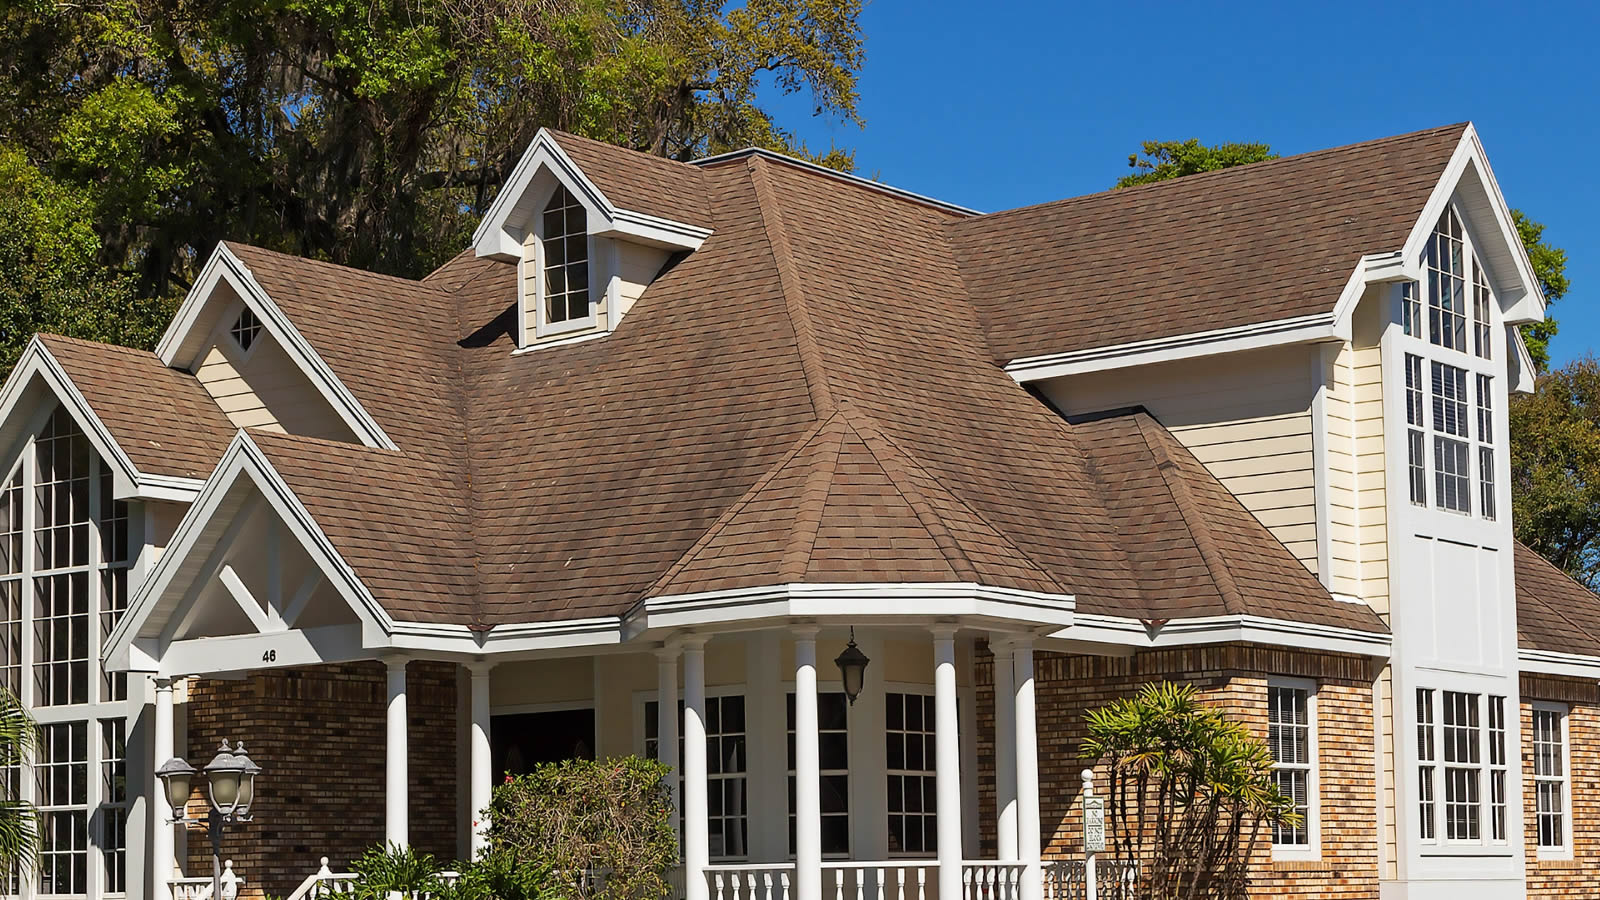 Local Kennesaw Roofing Contractor 